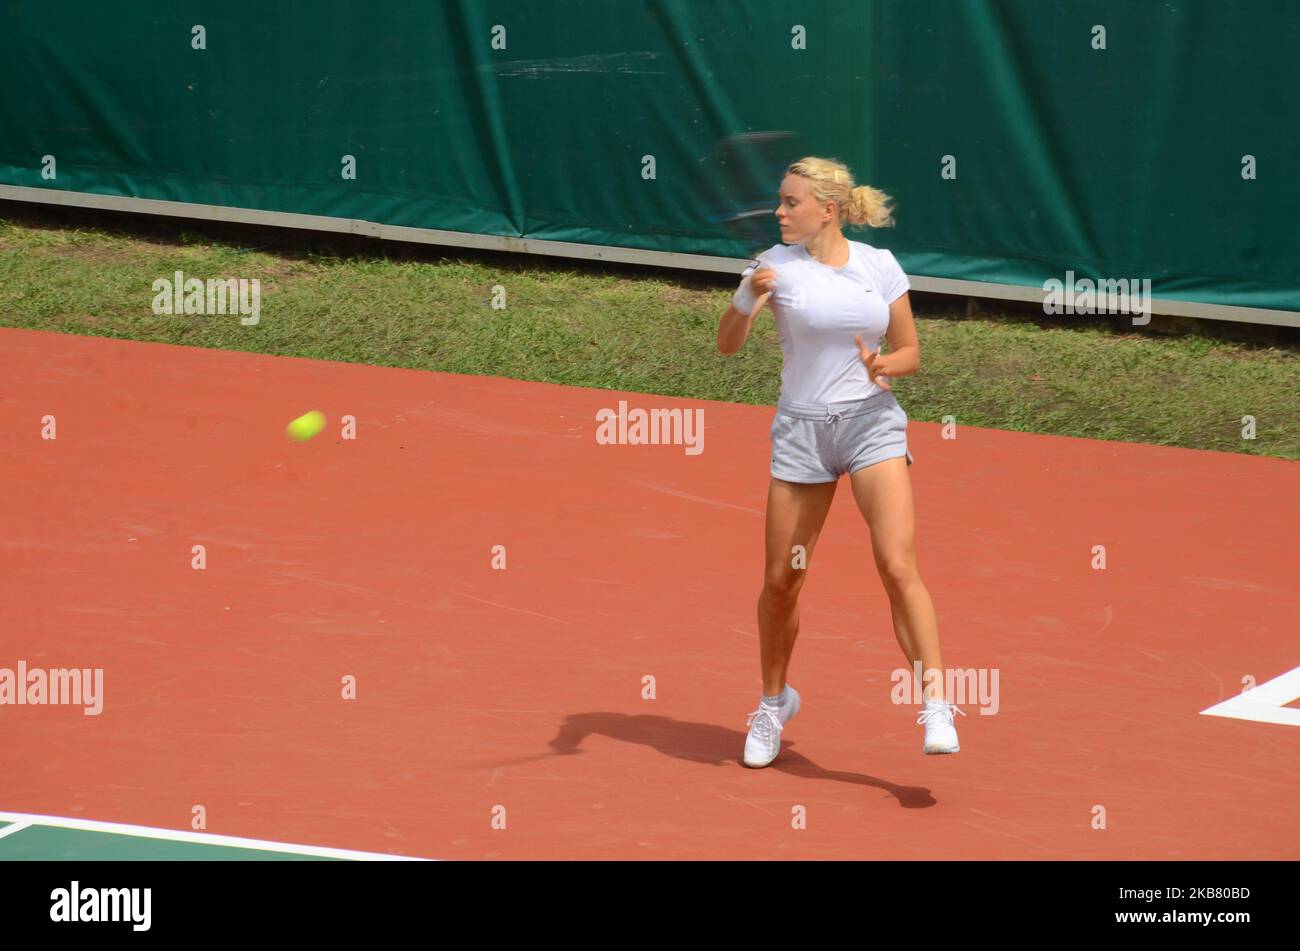 Carla Touly (FRA) plays against Omolade Aderemi (NGA) during their 1R Qualifying match at Lagos Open 2019 on 7th October 2019 in Lagos, Nigeria. (Photo by Olukayode Jaiyeola/NurPhoto) Stock Photo